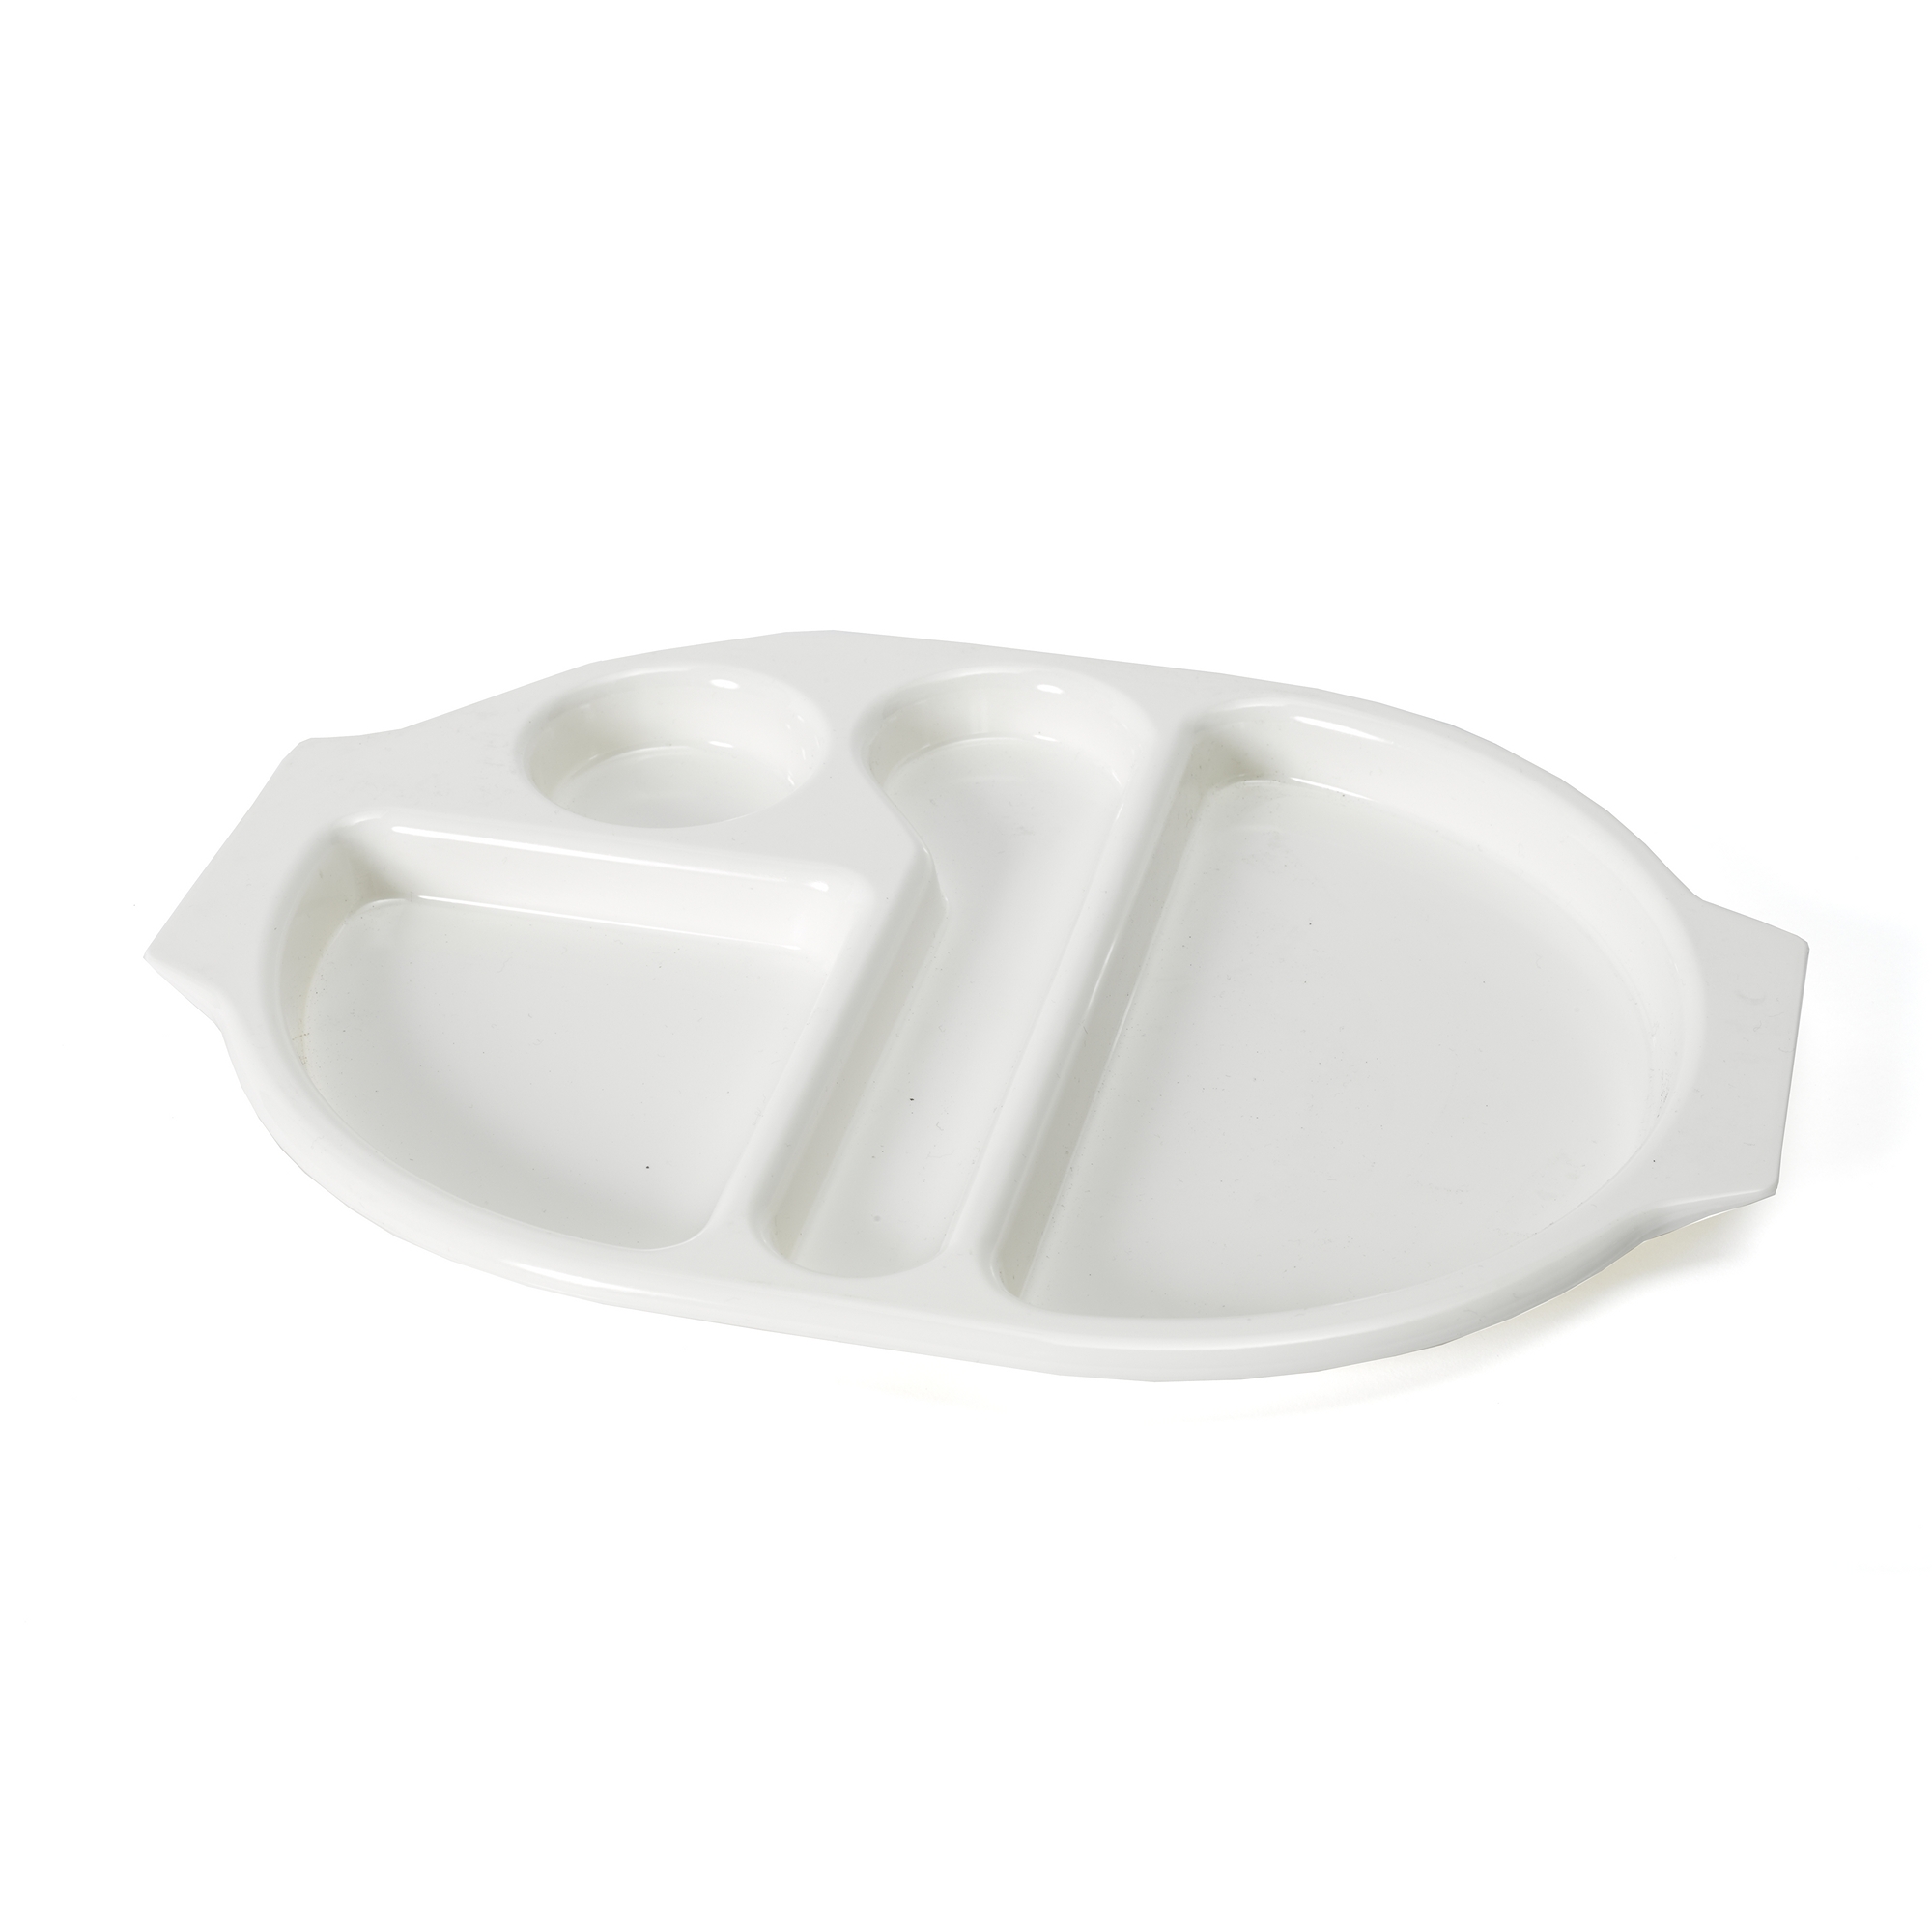 Meal Trays - Large - White